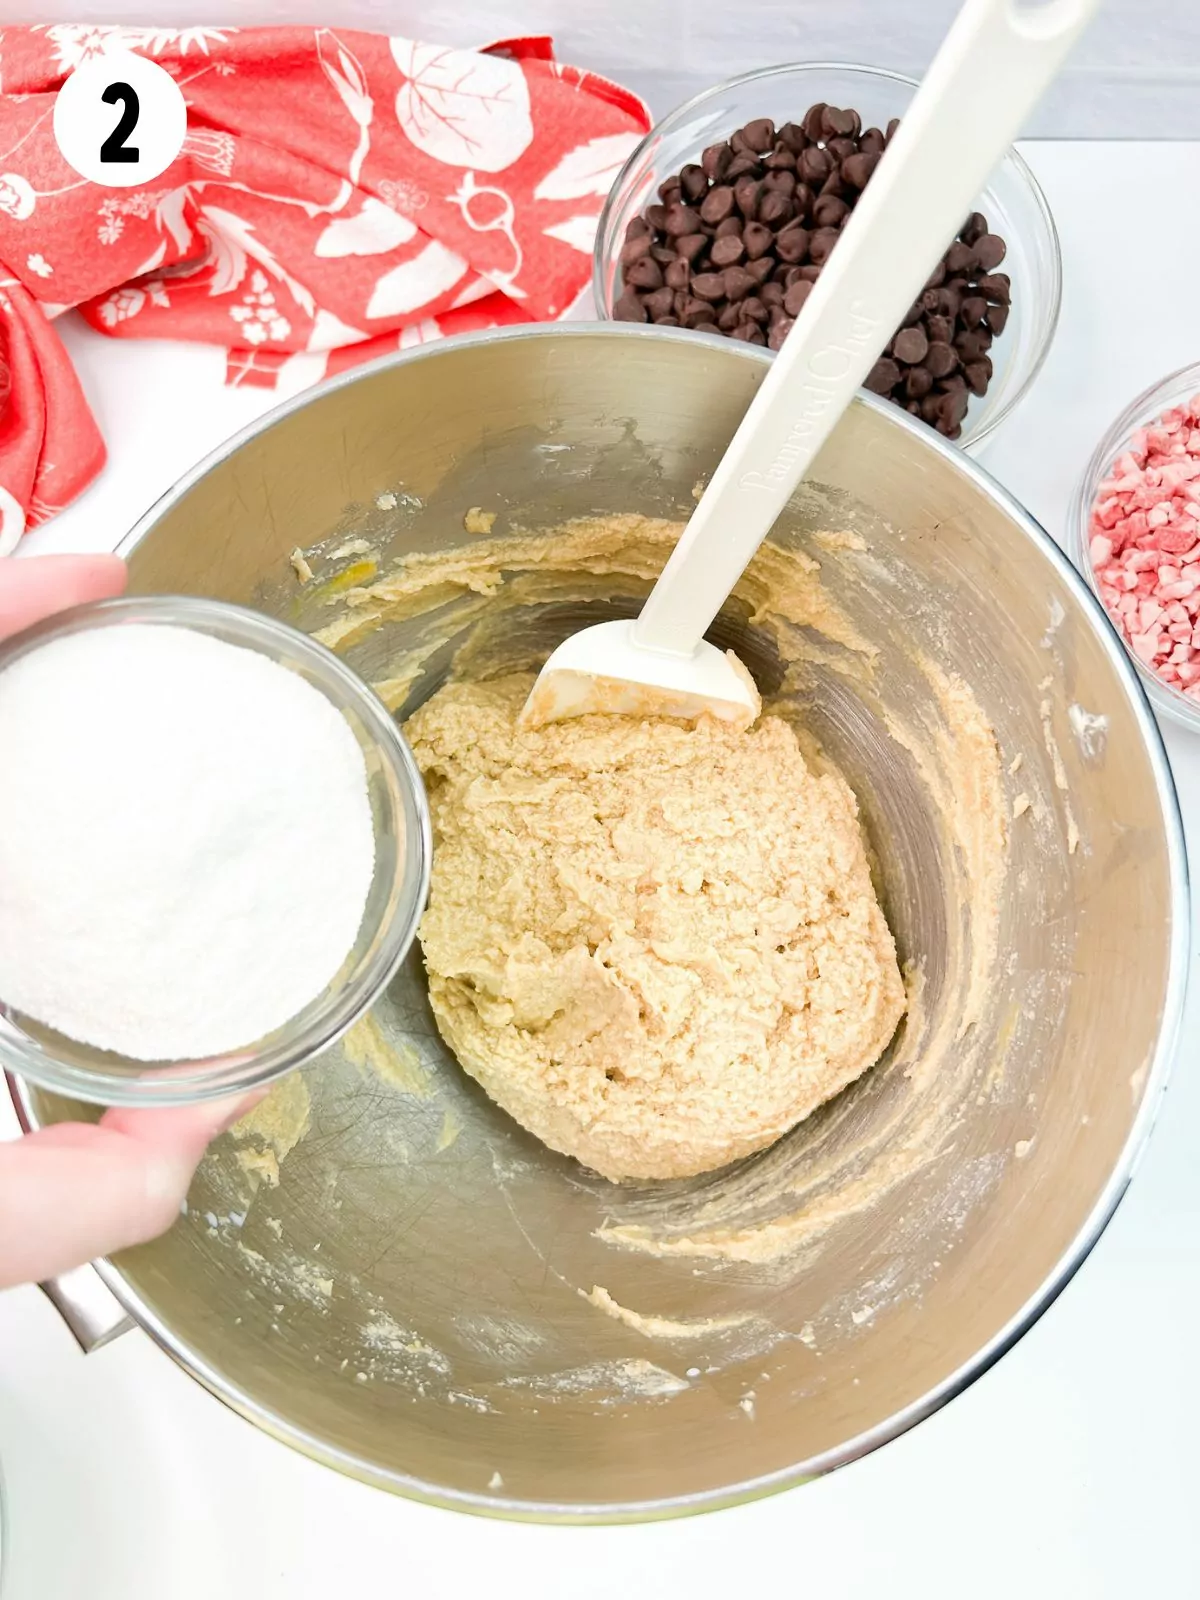 Add vanilla pudding mix to cookie dough batter.